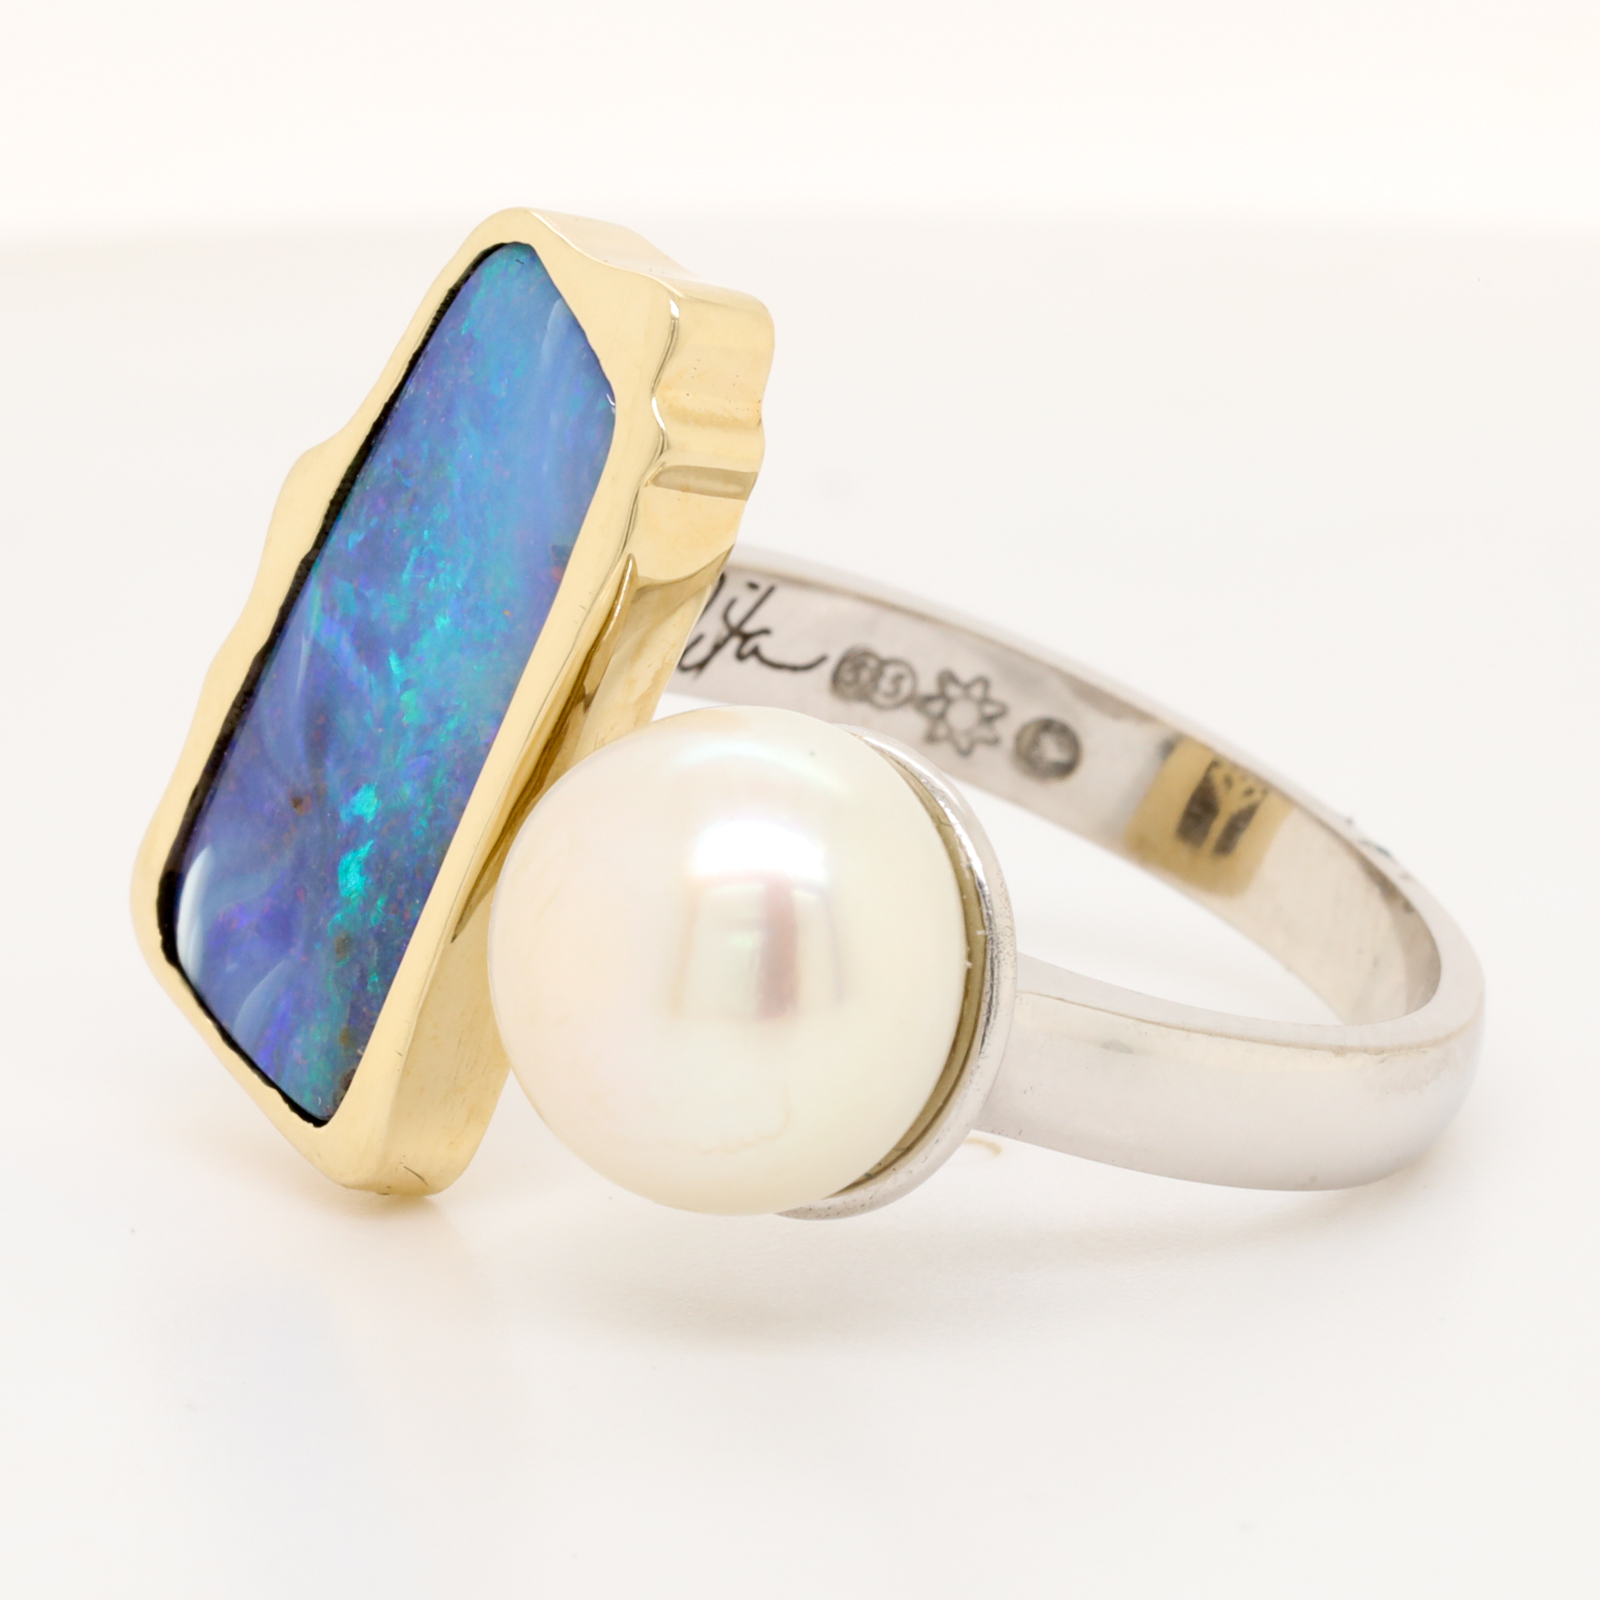 Blue Green Yellow Gold Solid Australian Boulder Opal and Fresh Water Pearl Ring